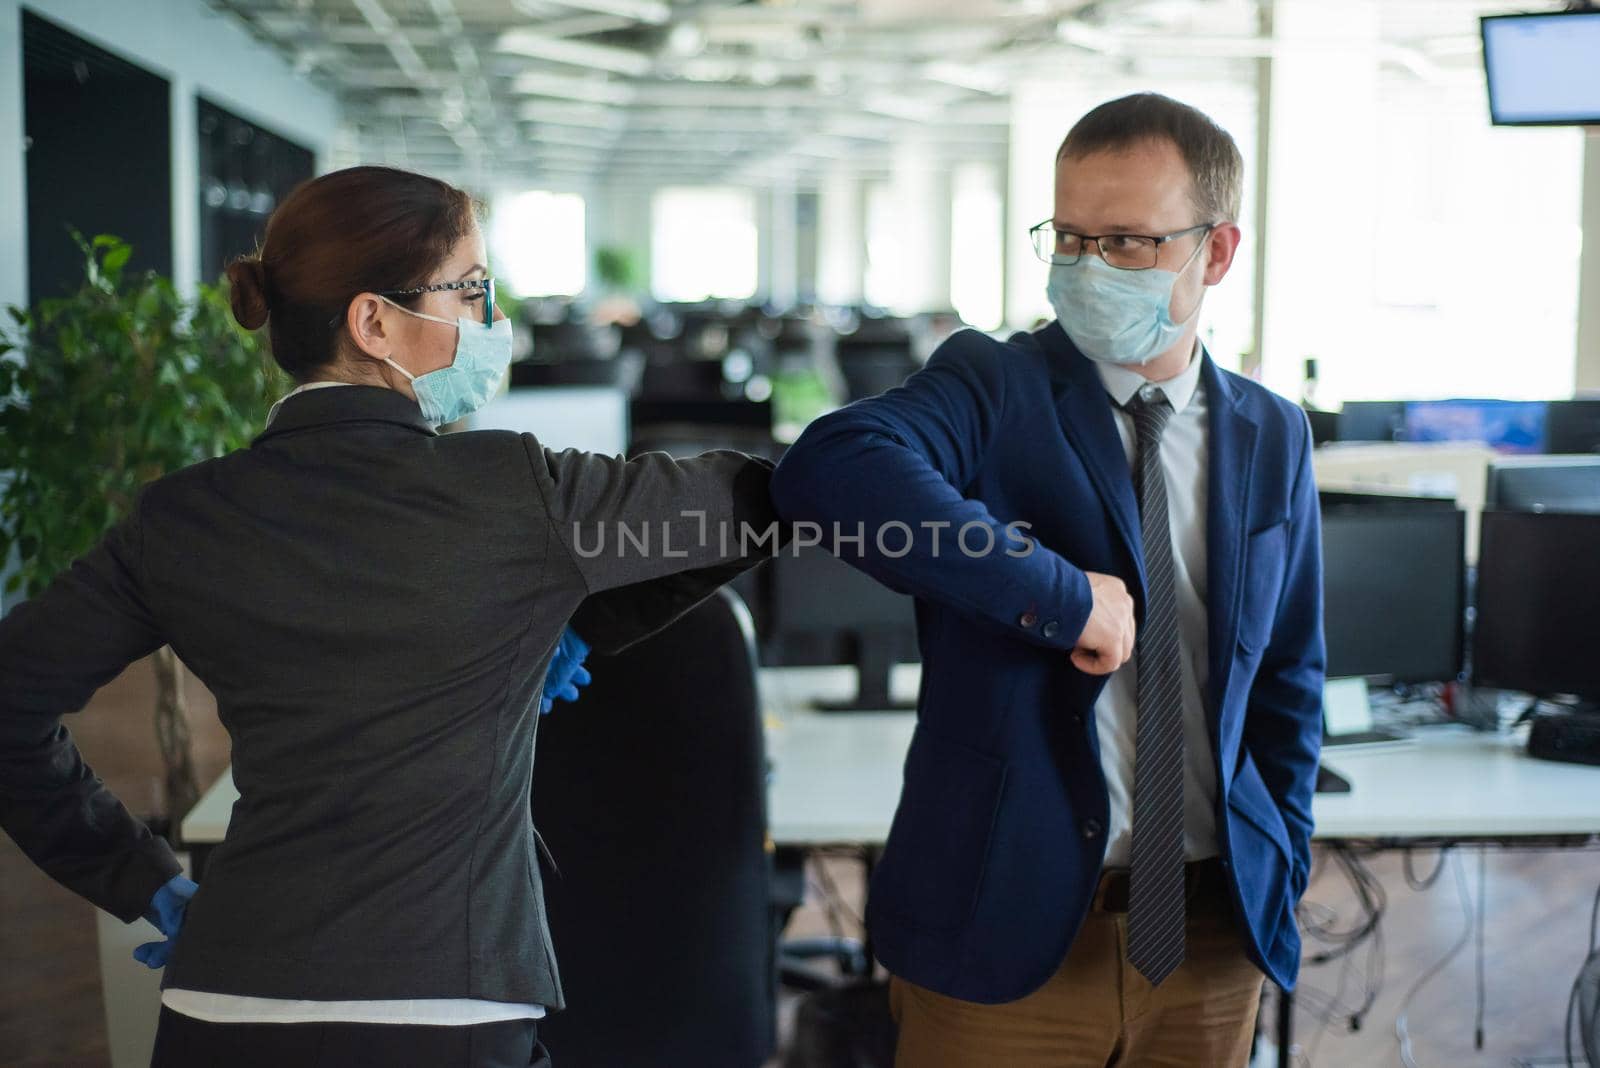 Office workers shake hands when meeting and greet bumping elbows. A new way to greet the obstructing spread of coronavirus. Man and woman in protective masks maintain a social distance at work